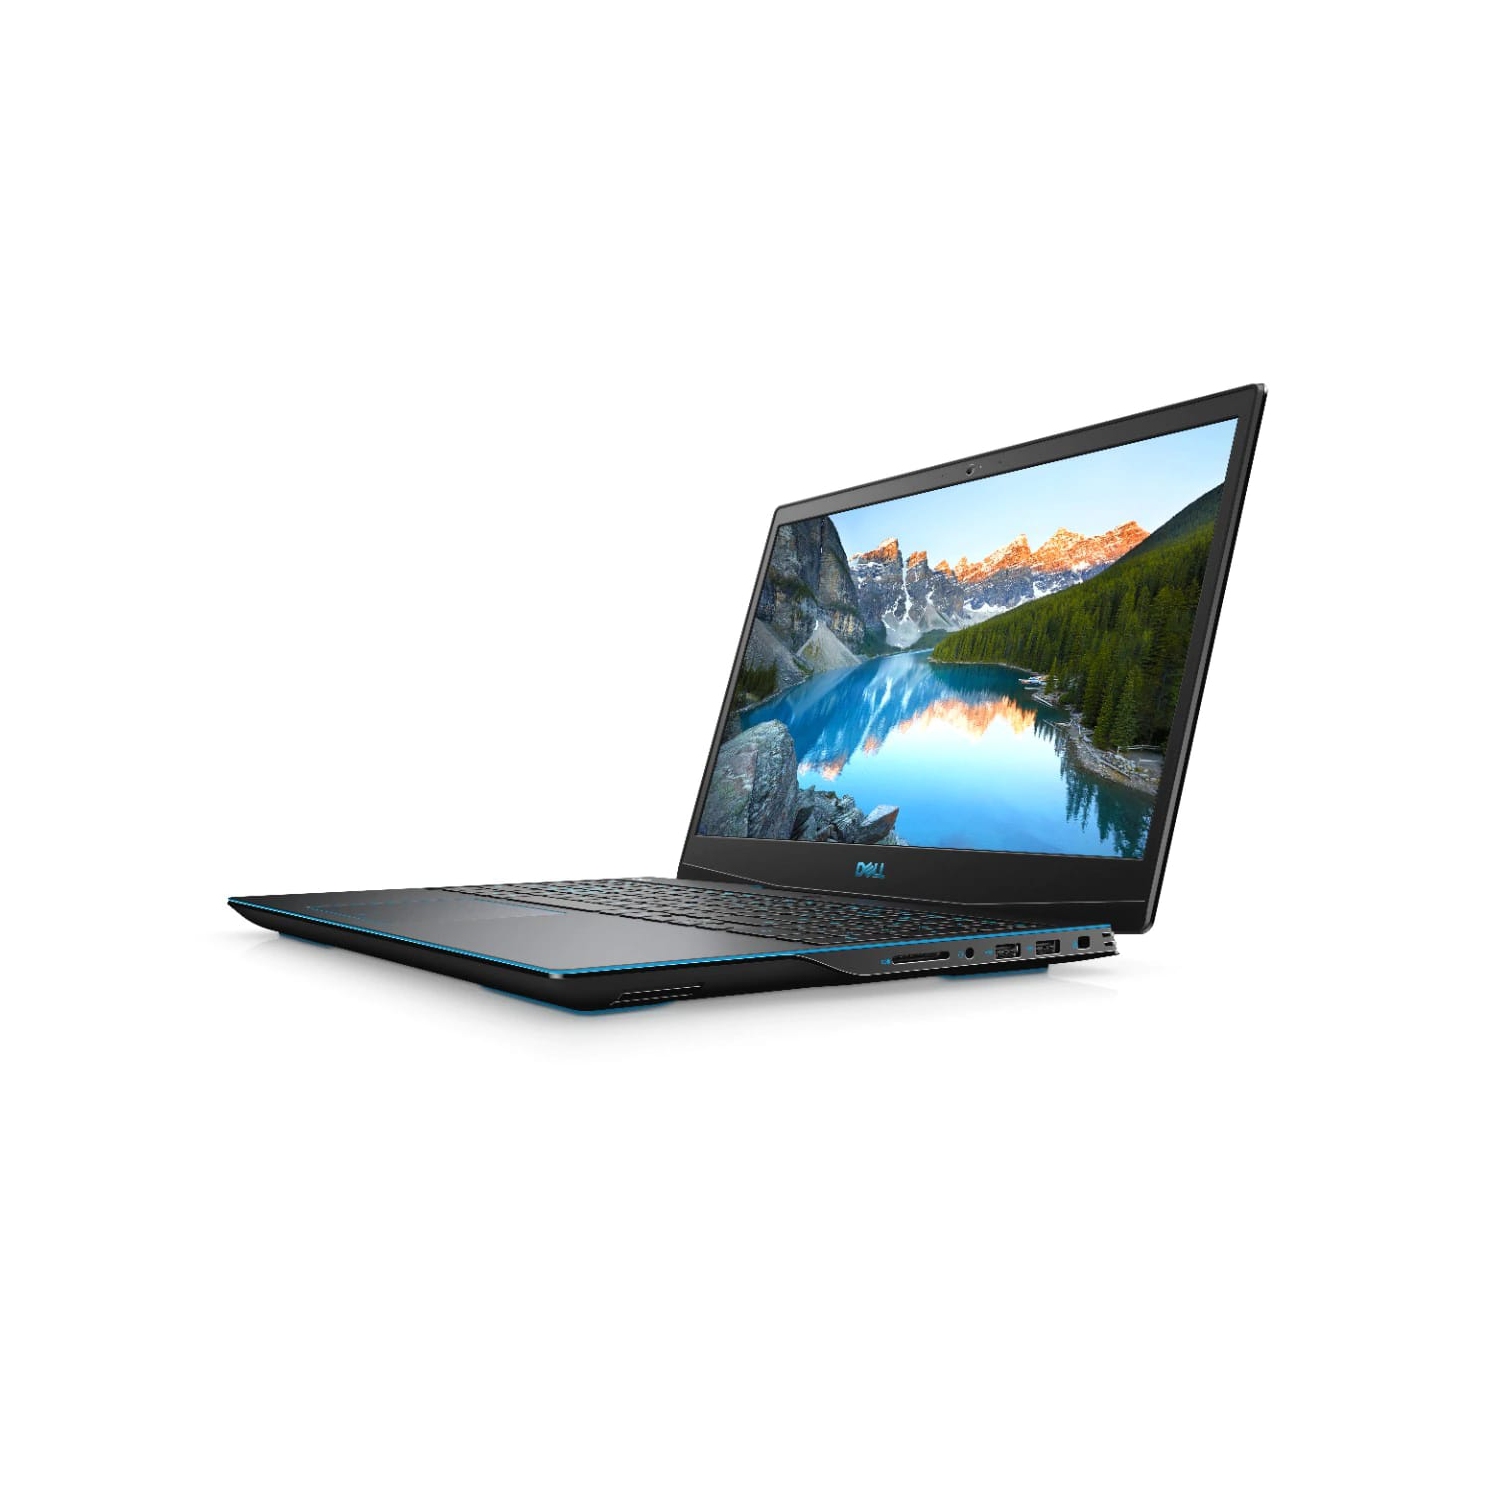 Refurbished (Excellent) – Dell G3 3500 Gaming Laptop (2020) | 15.6" FHD | Core i5 - 1TB SSD - 16GB RAM - GTX 1650 | 4 Cores @ 4.5 GHz - 10th Gen CPU